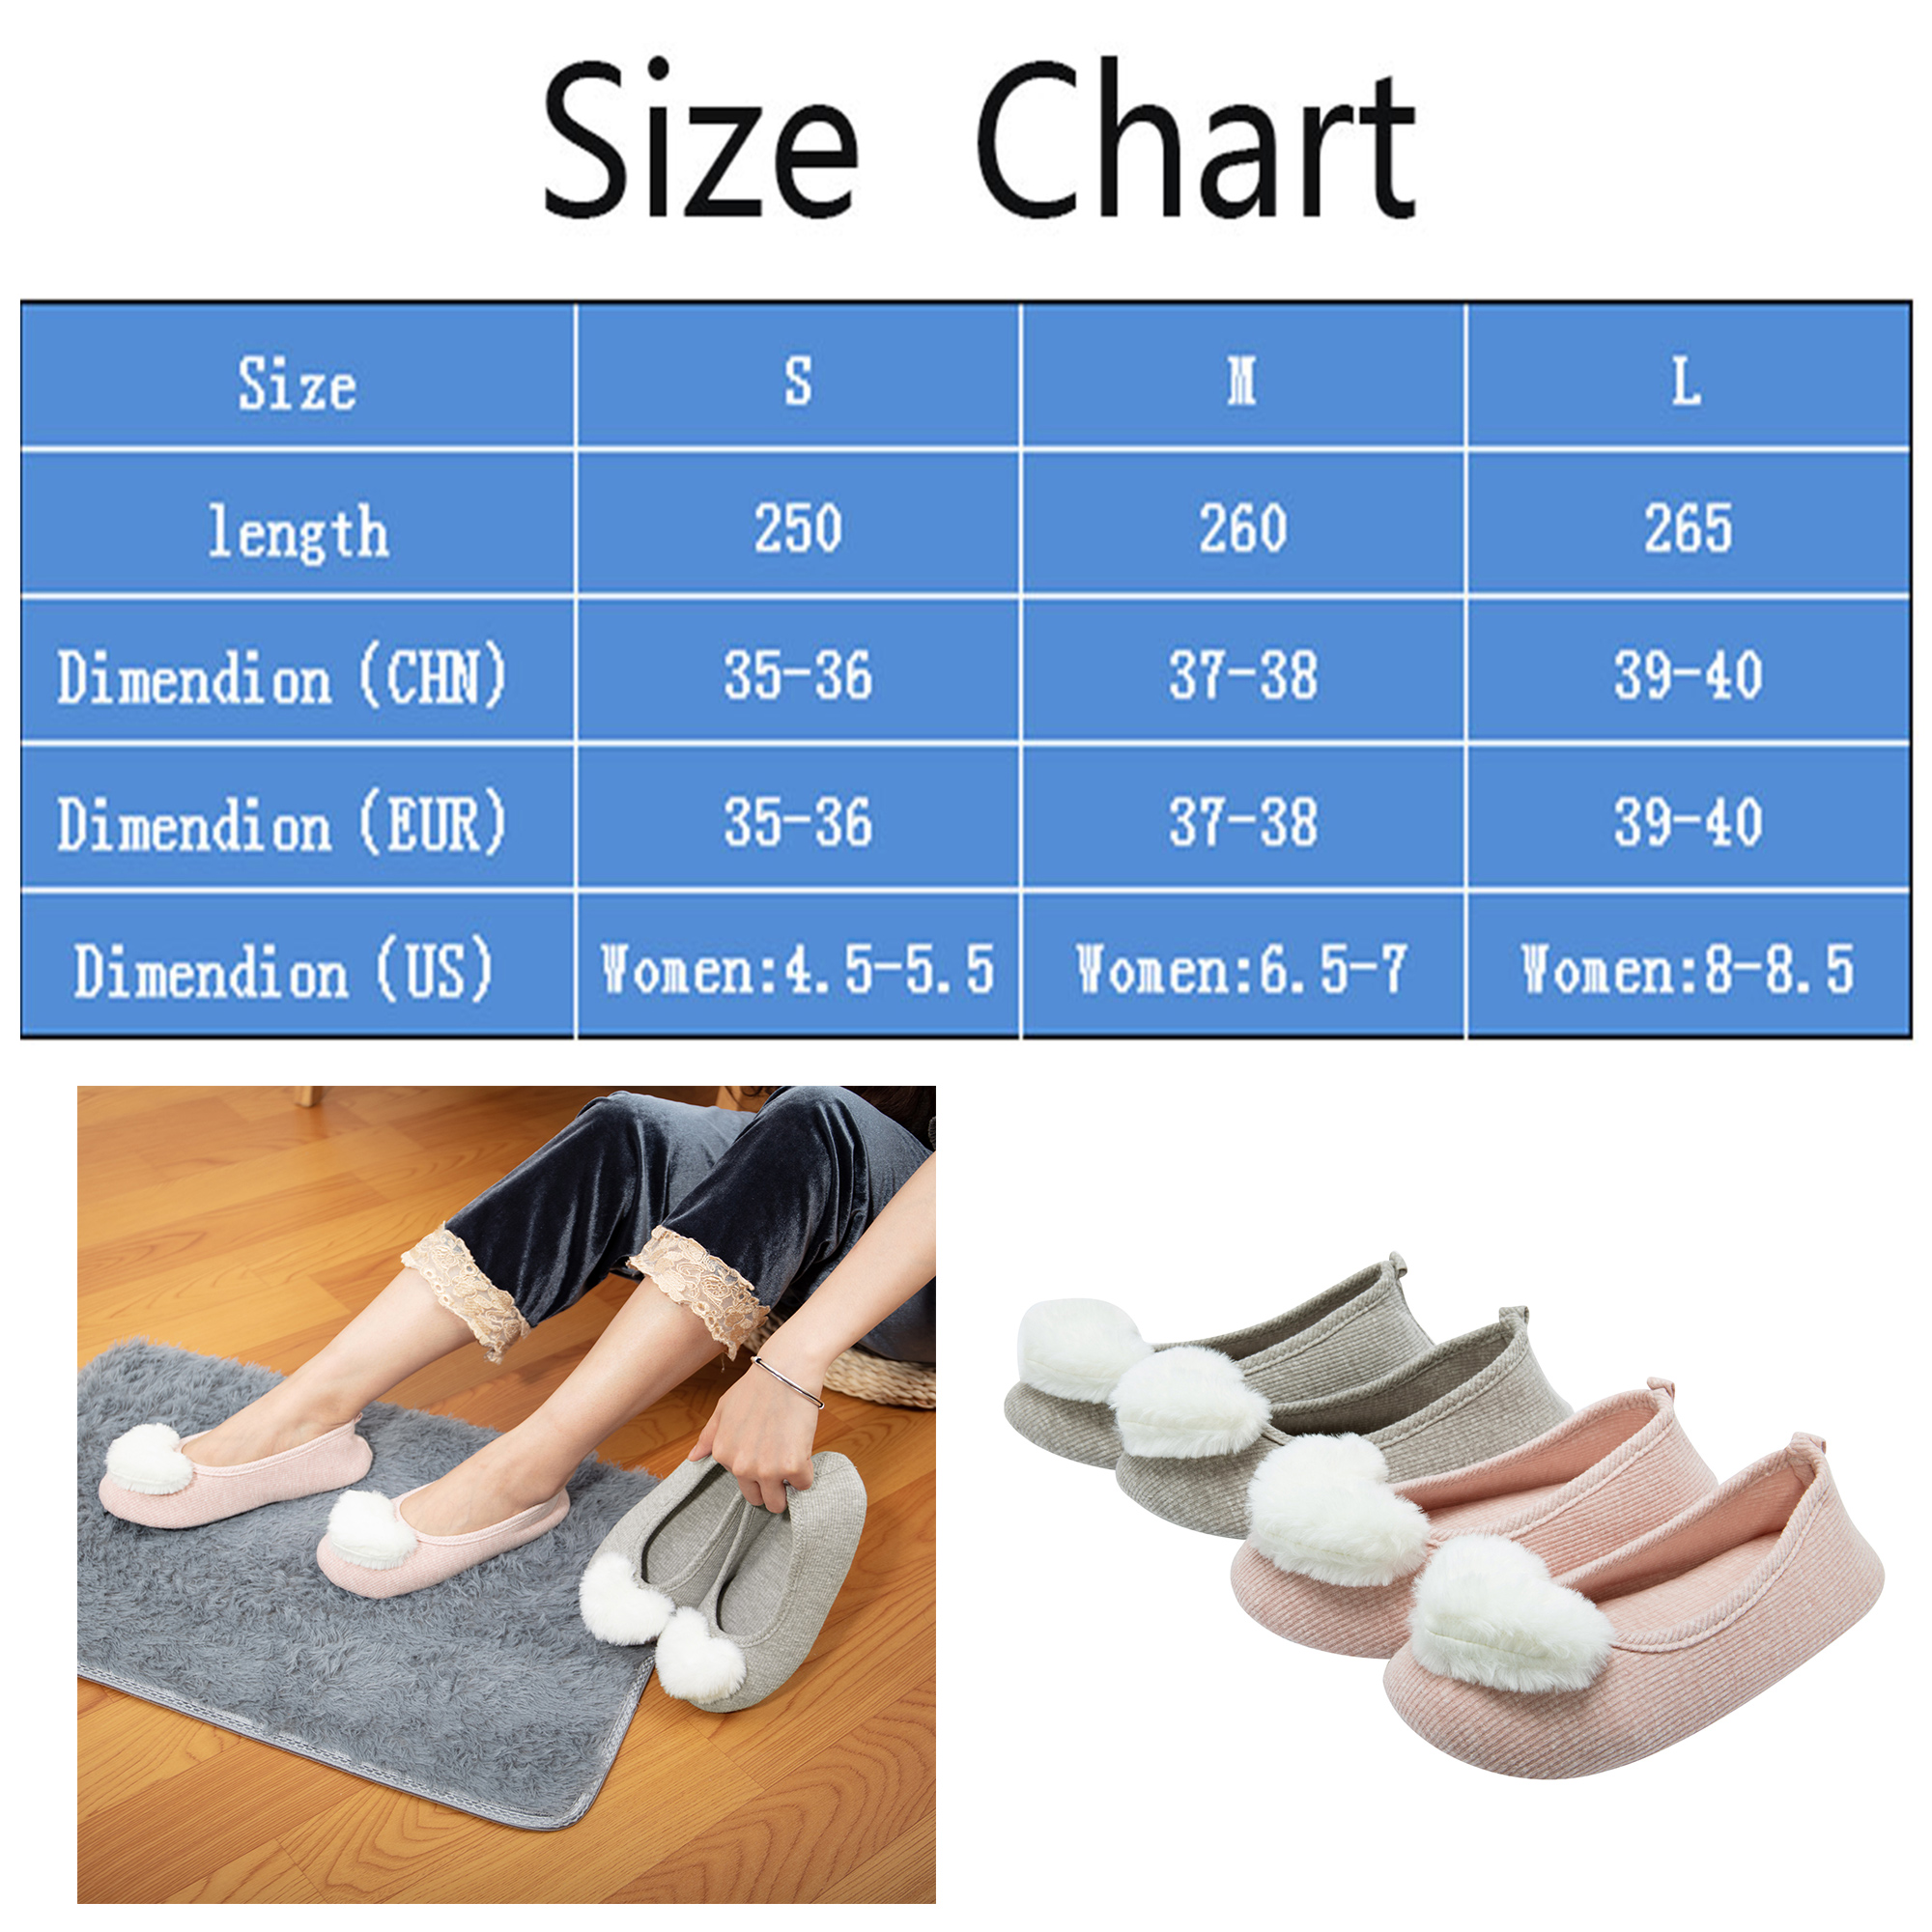 2 Pairs Women's and Girls Ballet Flat Classic Round Toe Slip on Casual Comfort Walking Shoes Indoor and Outdoor Shoes - image 2 of 7